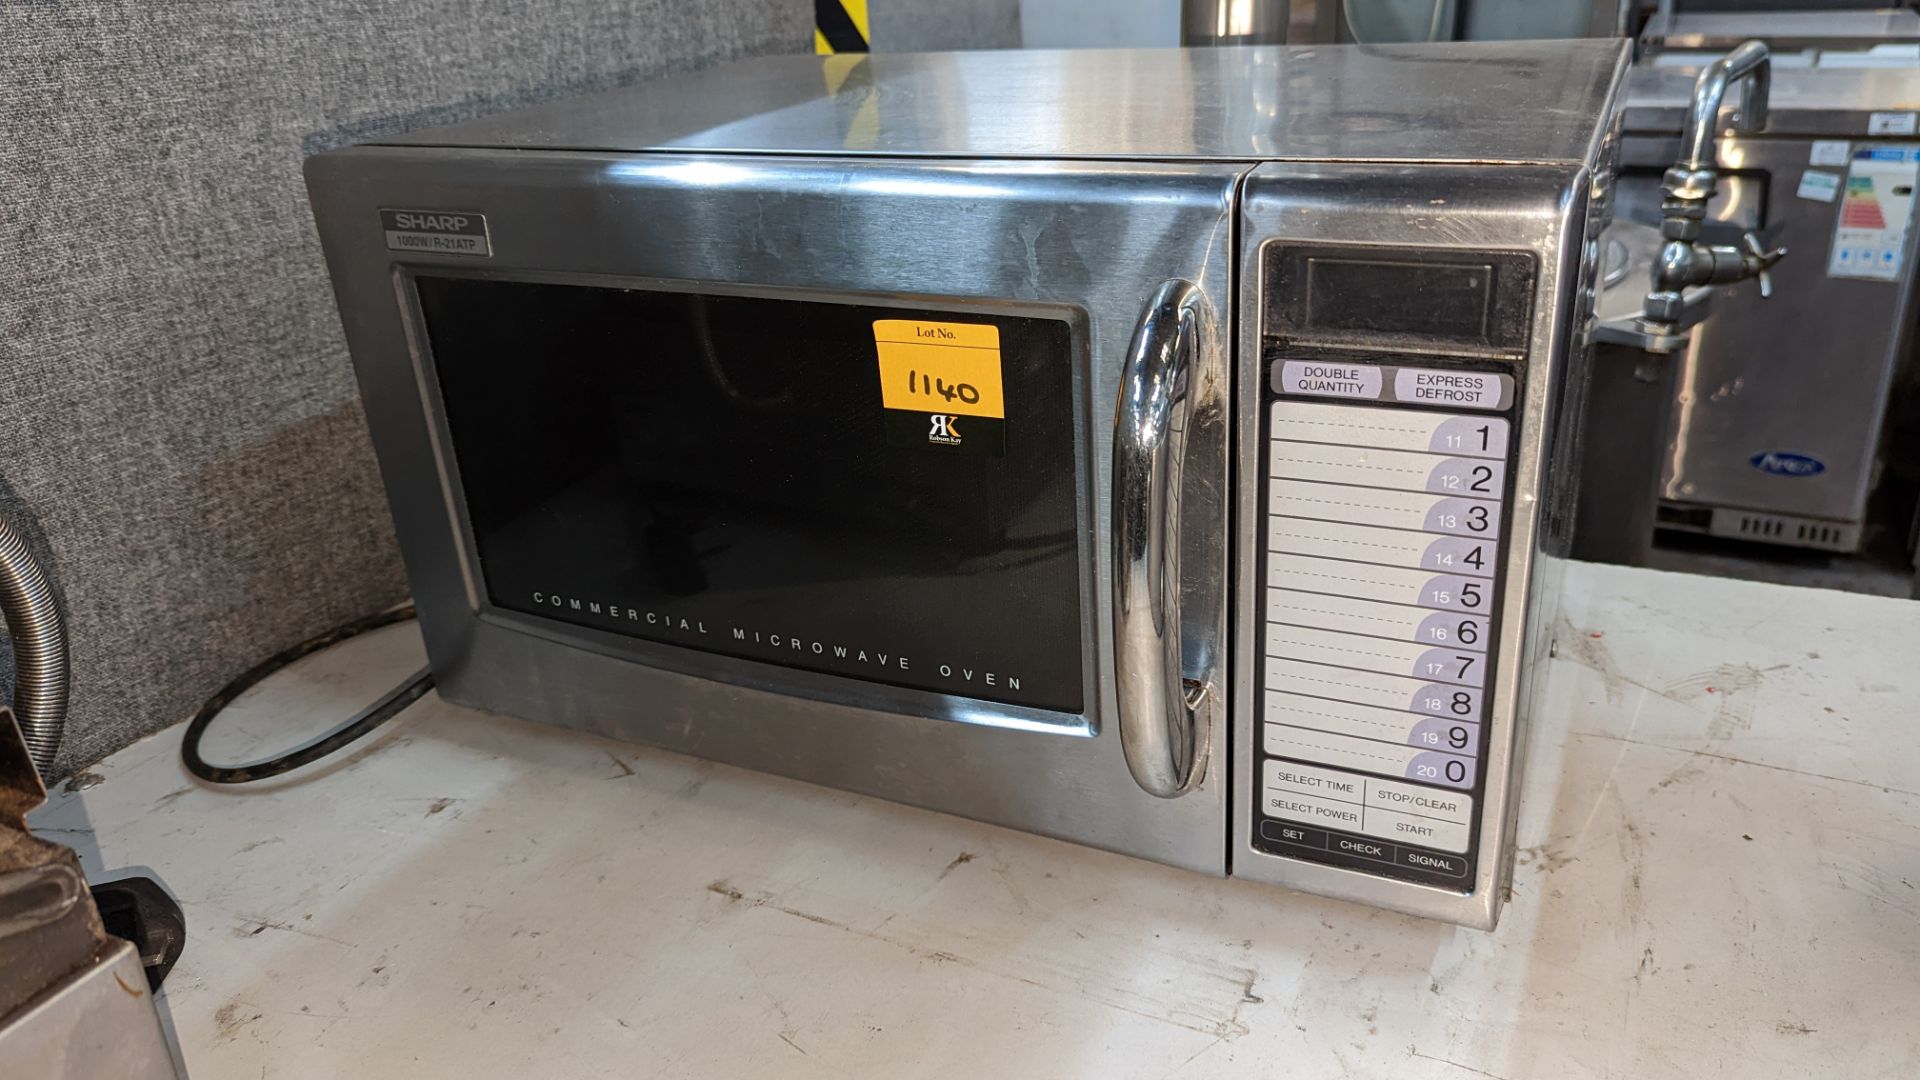 Sharp commercial microwave - Image 3 of 6